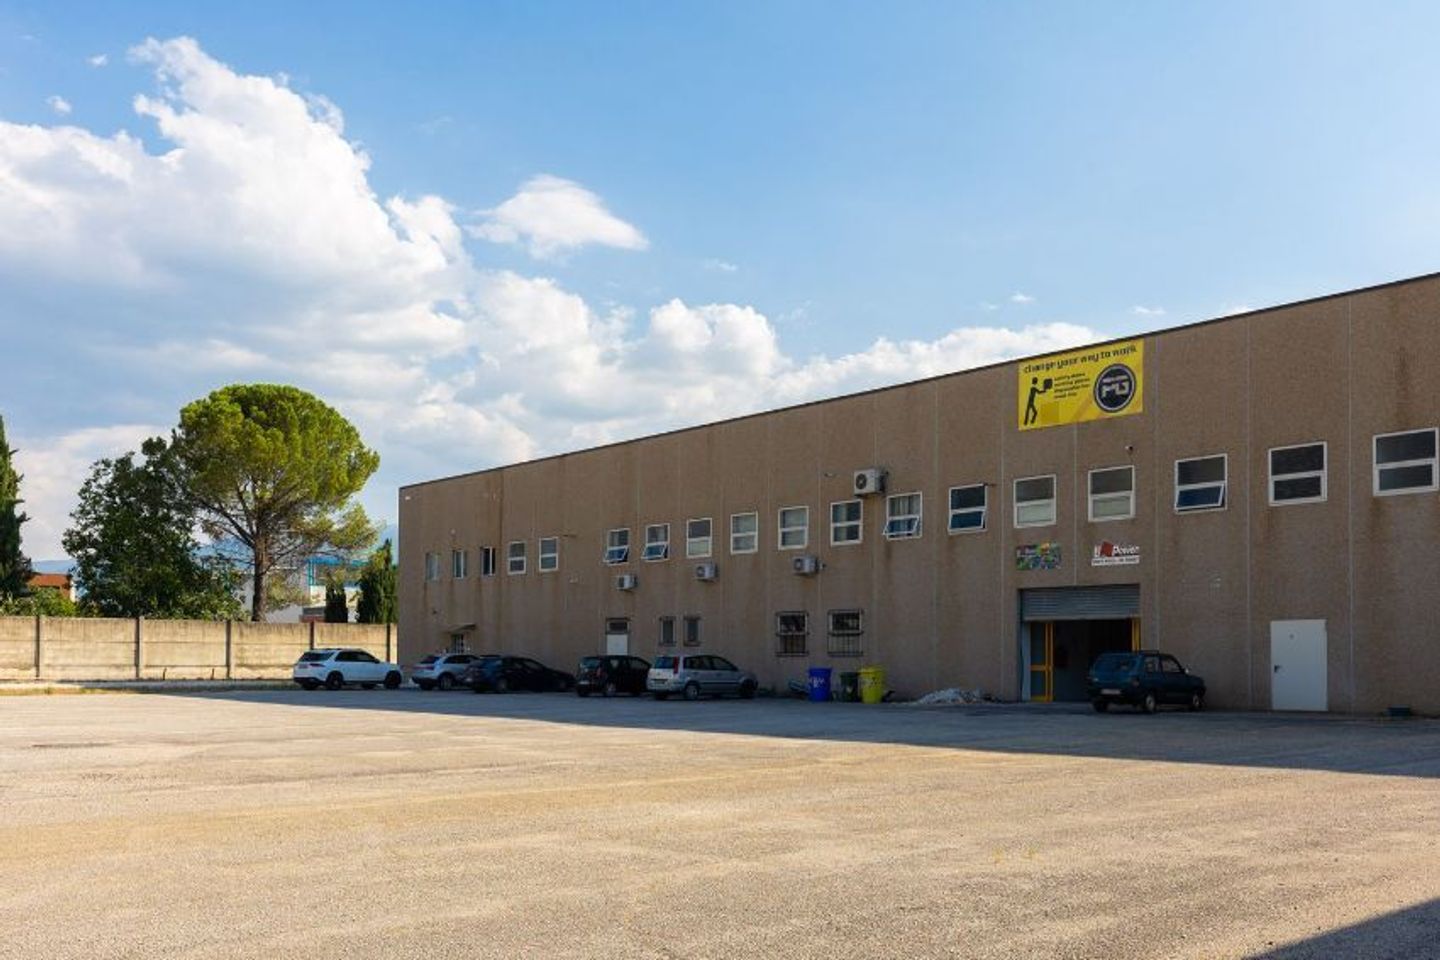 Industrial Warehouses & Caretaker House For Sale In Sulmona Abruzzo Italy, Sulmona, Abruzzo, Italy